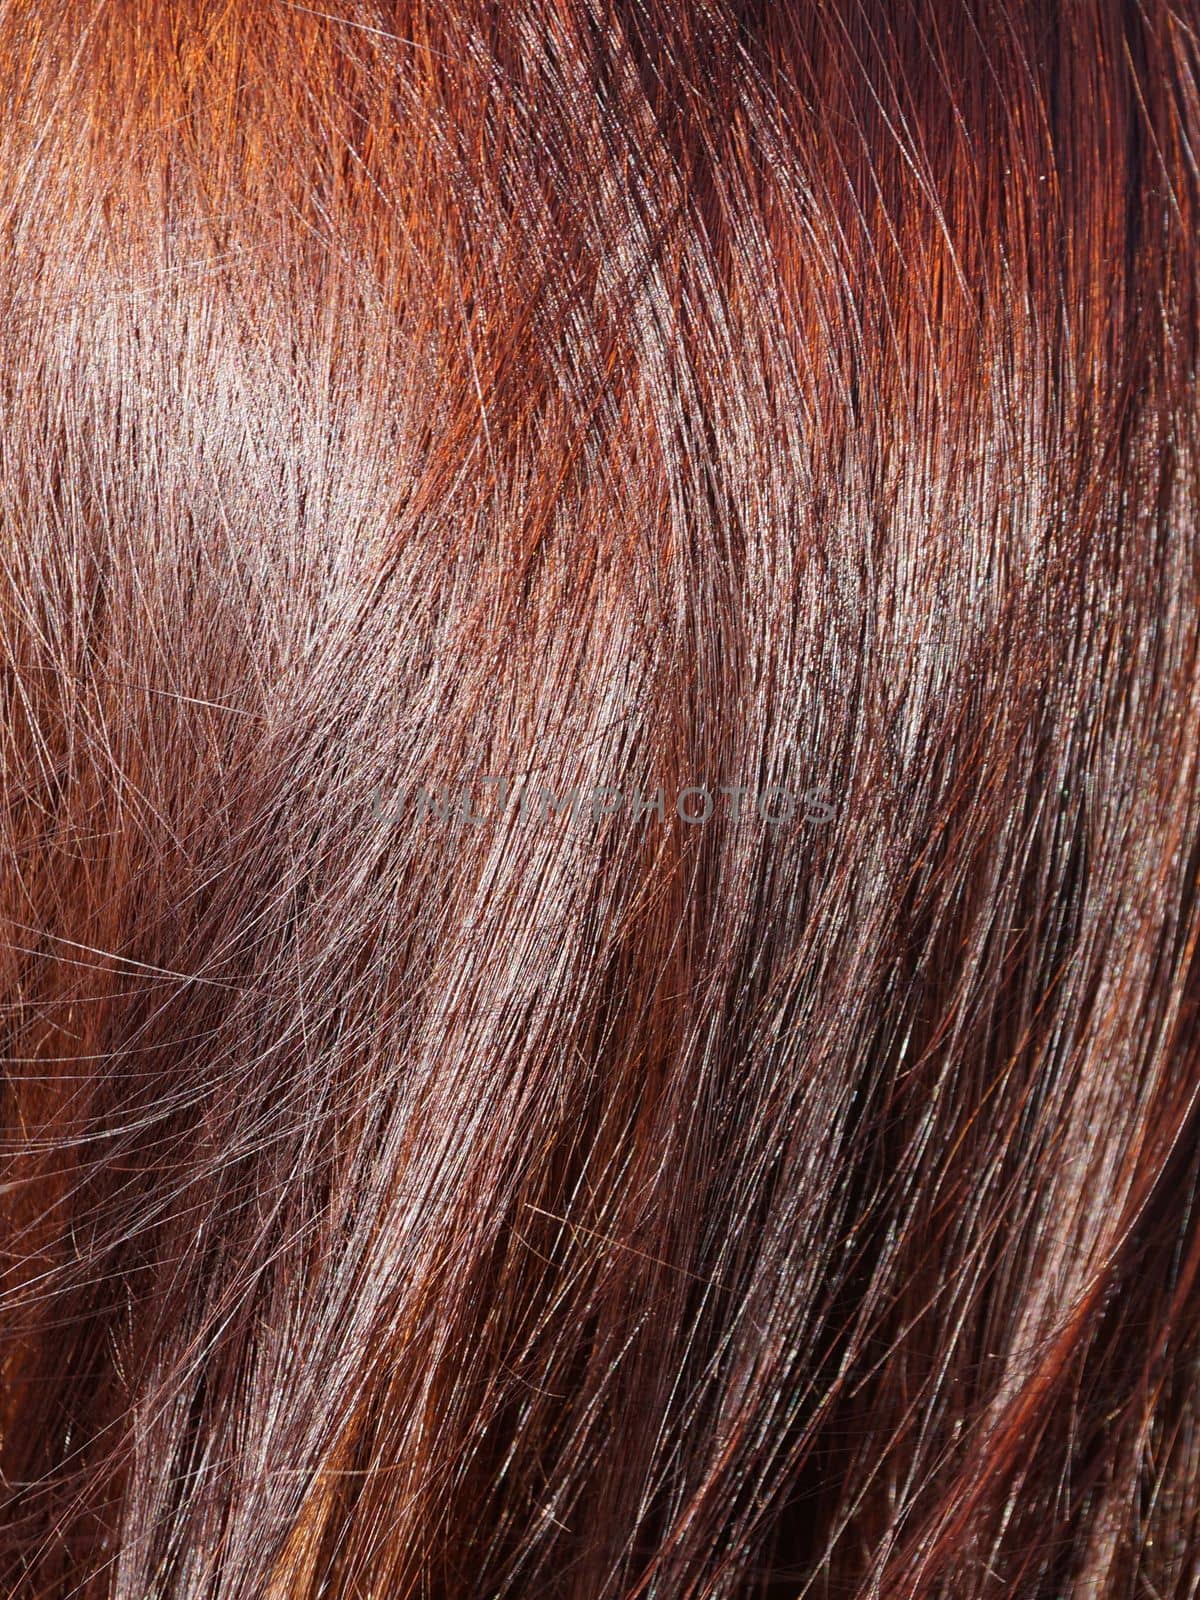 red brown female hair close up in sunlight for vertical background